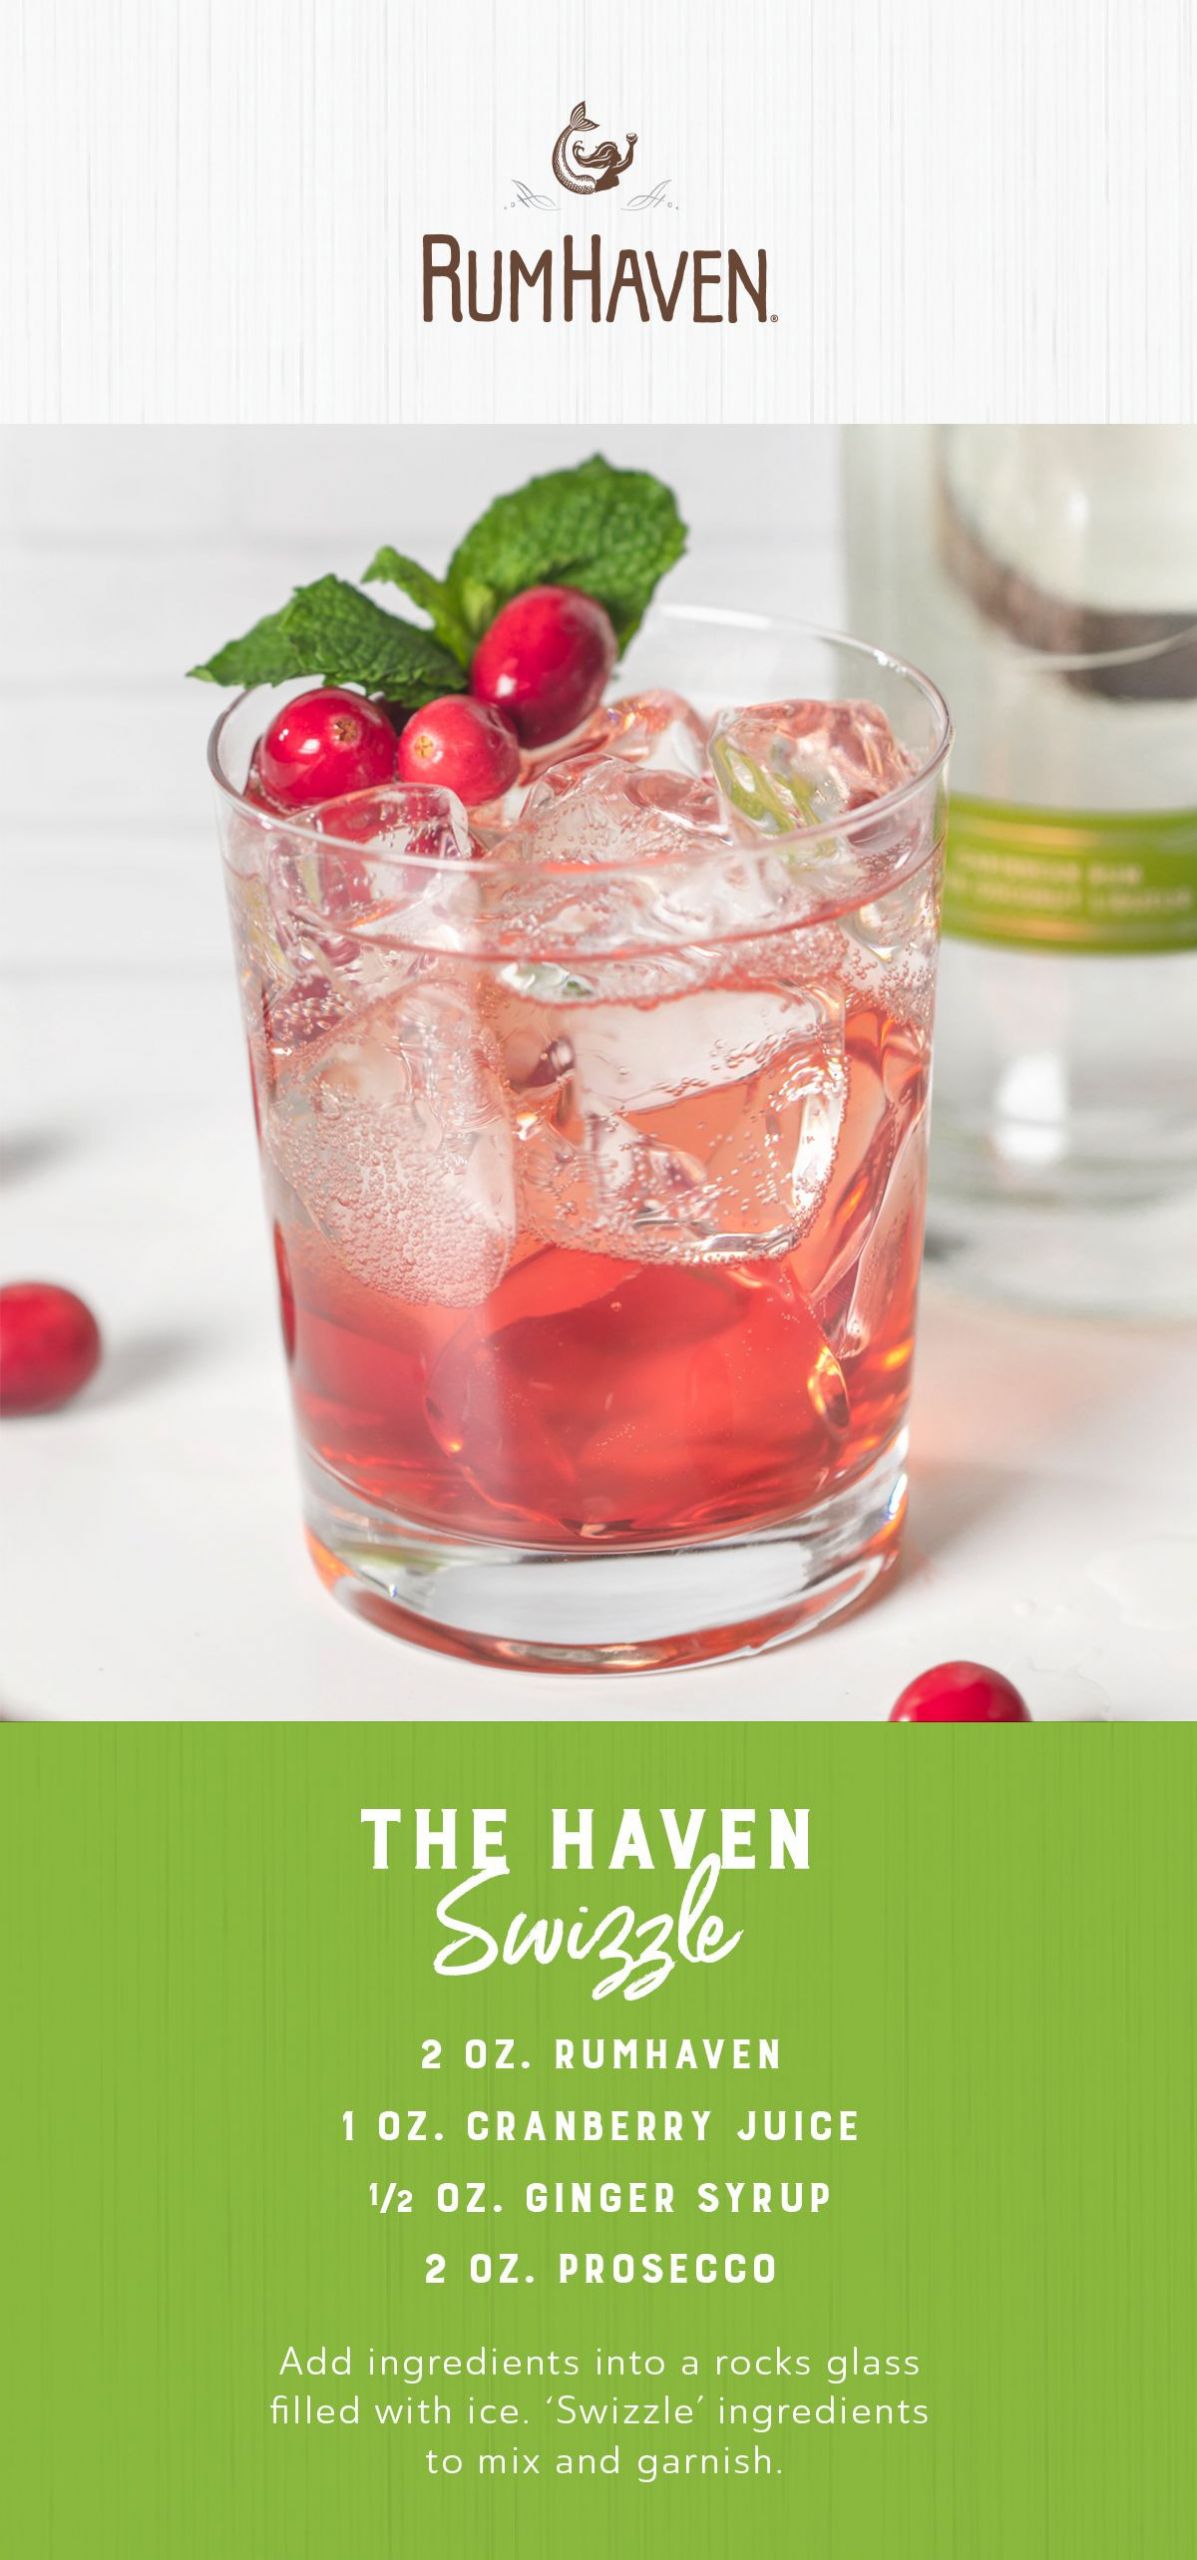 Holiday Rum Drinks
 Craft this festive rum cocktail for an instant crowd